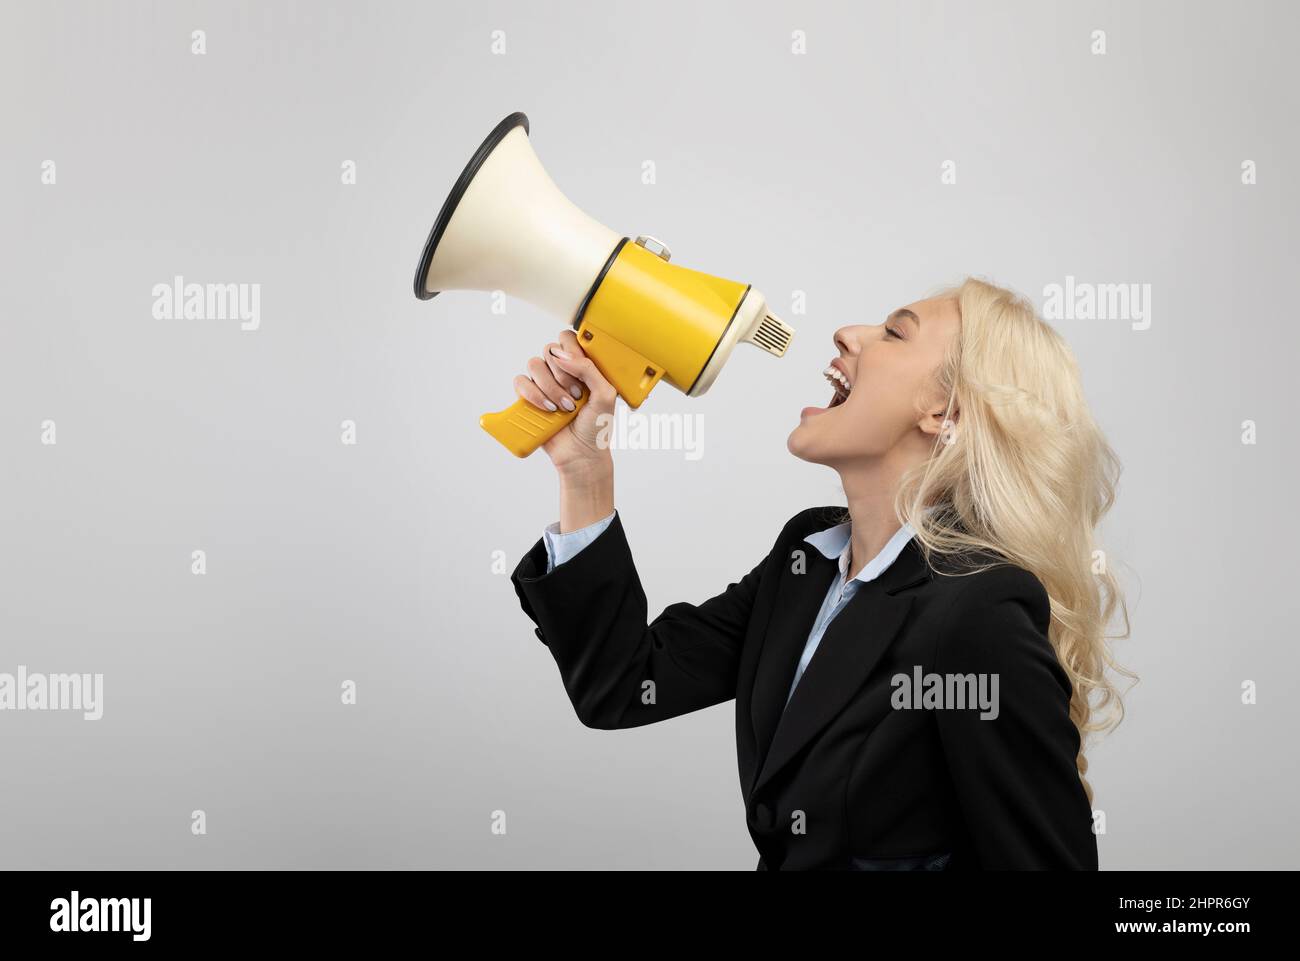 Announcement concept. Businesswoman shouting with megaphone in hands, sharing news over light background Stock Photo